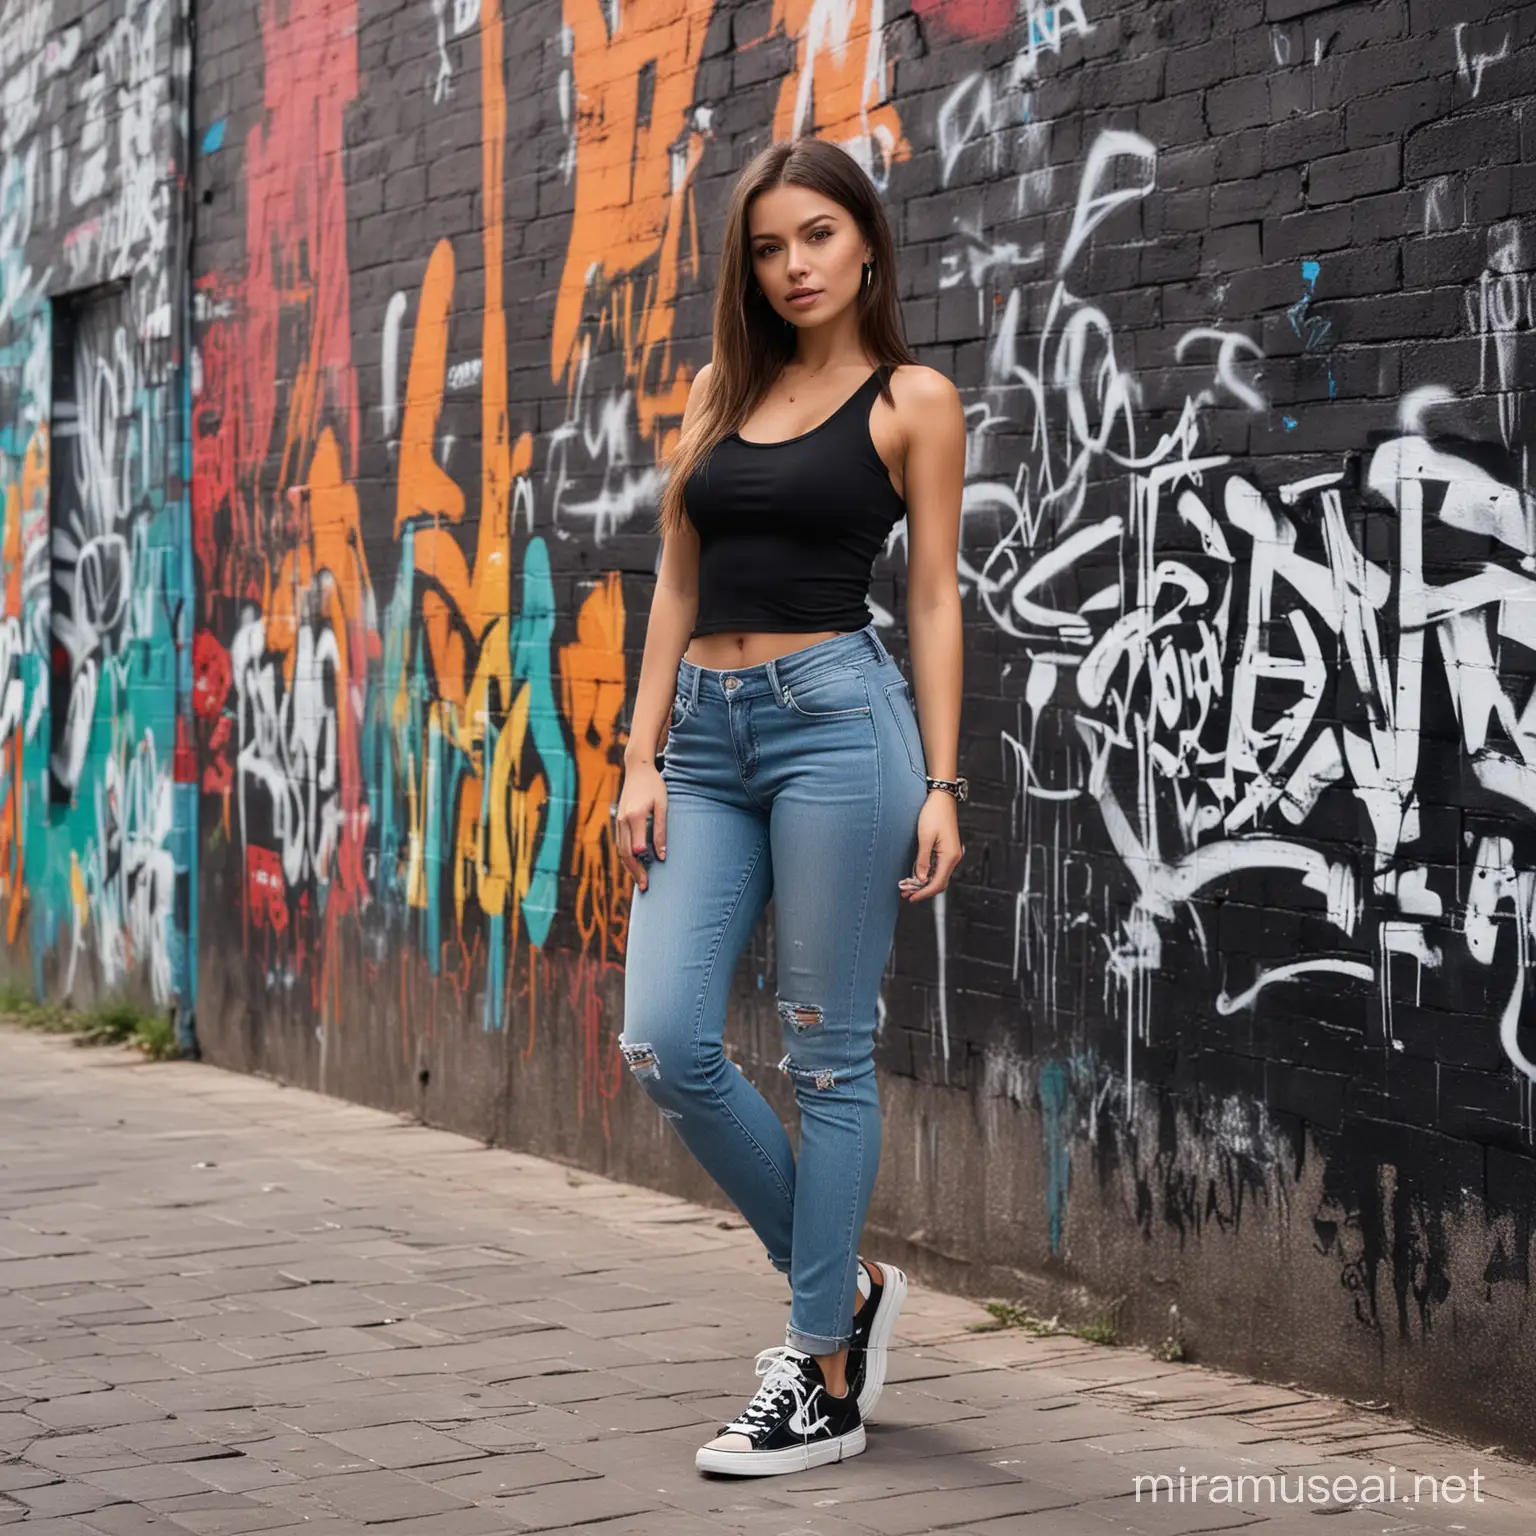 Milana in a chic streetwear outfit against the backdrop of a vibrant graffiti wall.

catchy, good looking , skiny skin, attractive , sexy
